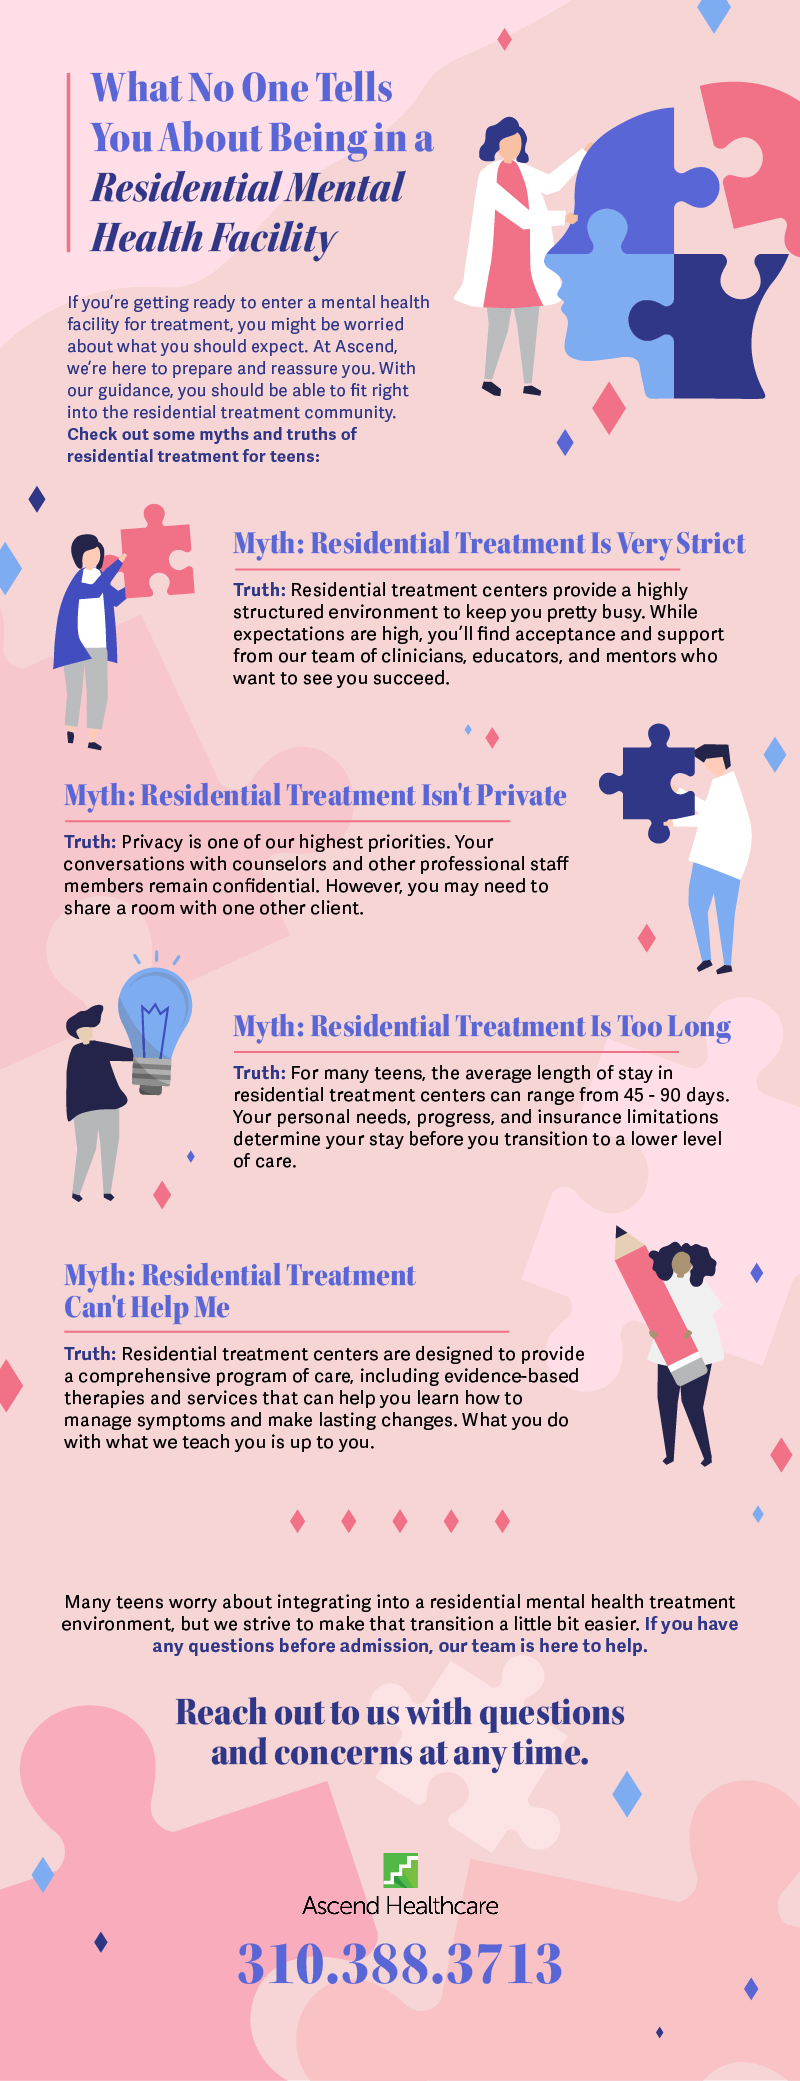 What No One Tells You About Being in a Residential Mental Health Facility Infographic